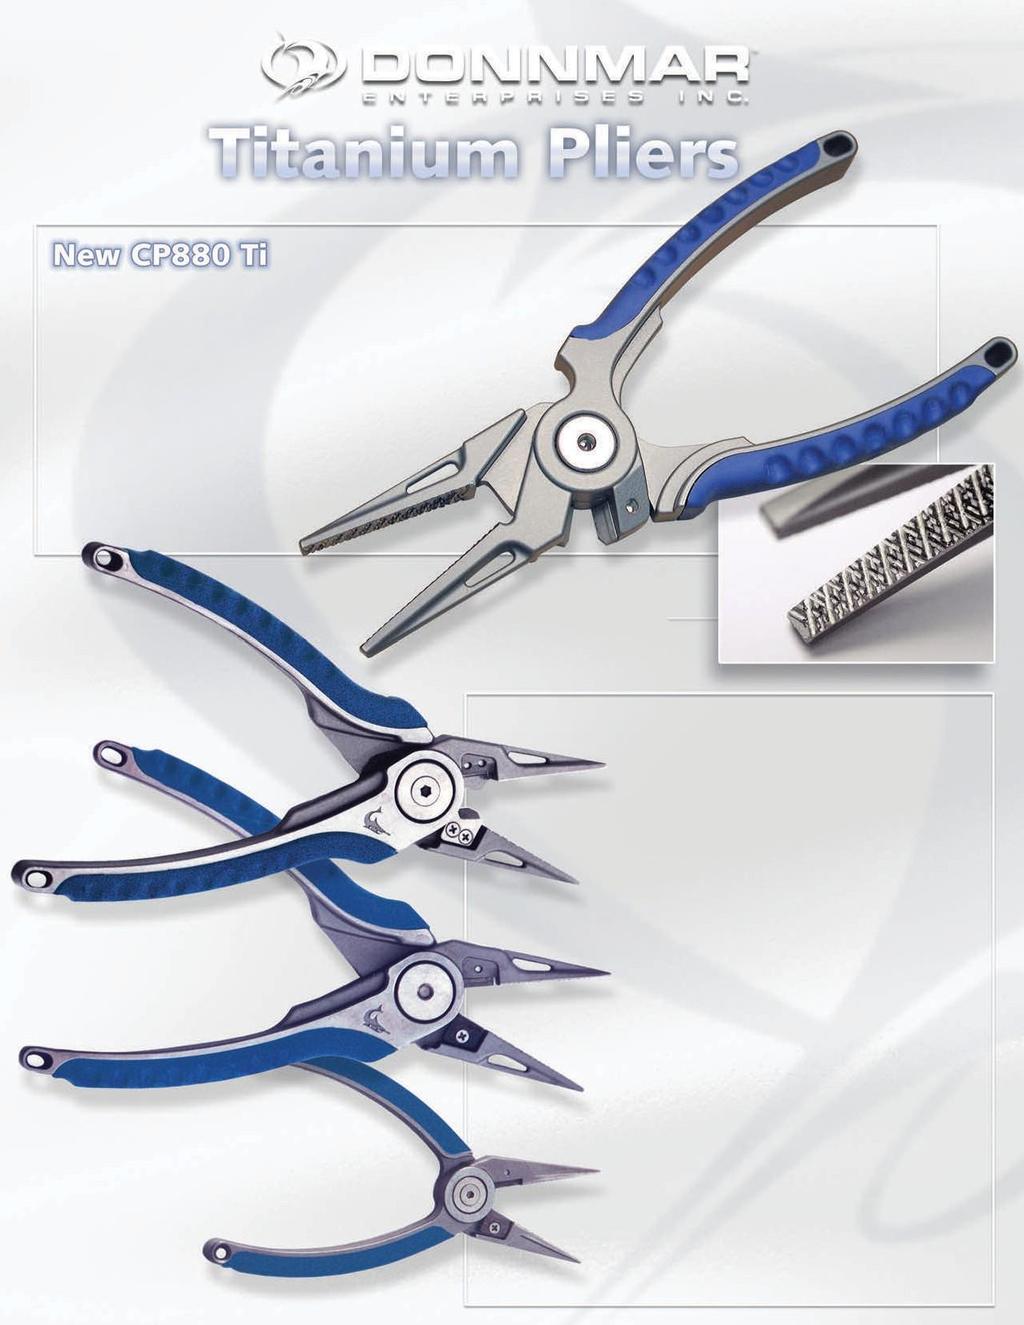 Donnmar Titanium pliers continue to be the choice of serious fishermen across the country. They are revered for their ultra-lightweight, superior strength and easy-to-grip design.